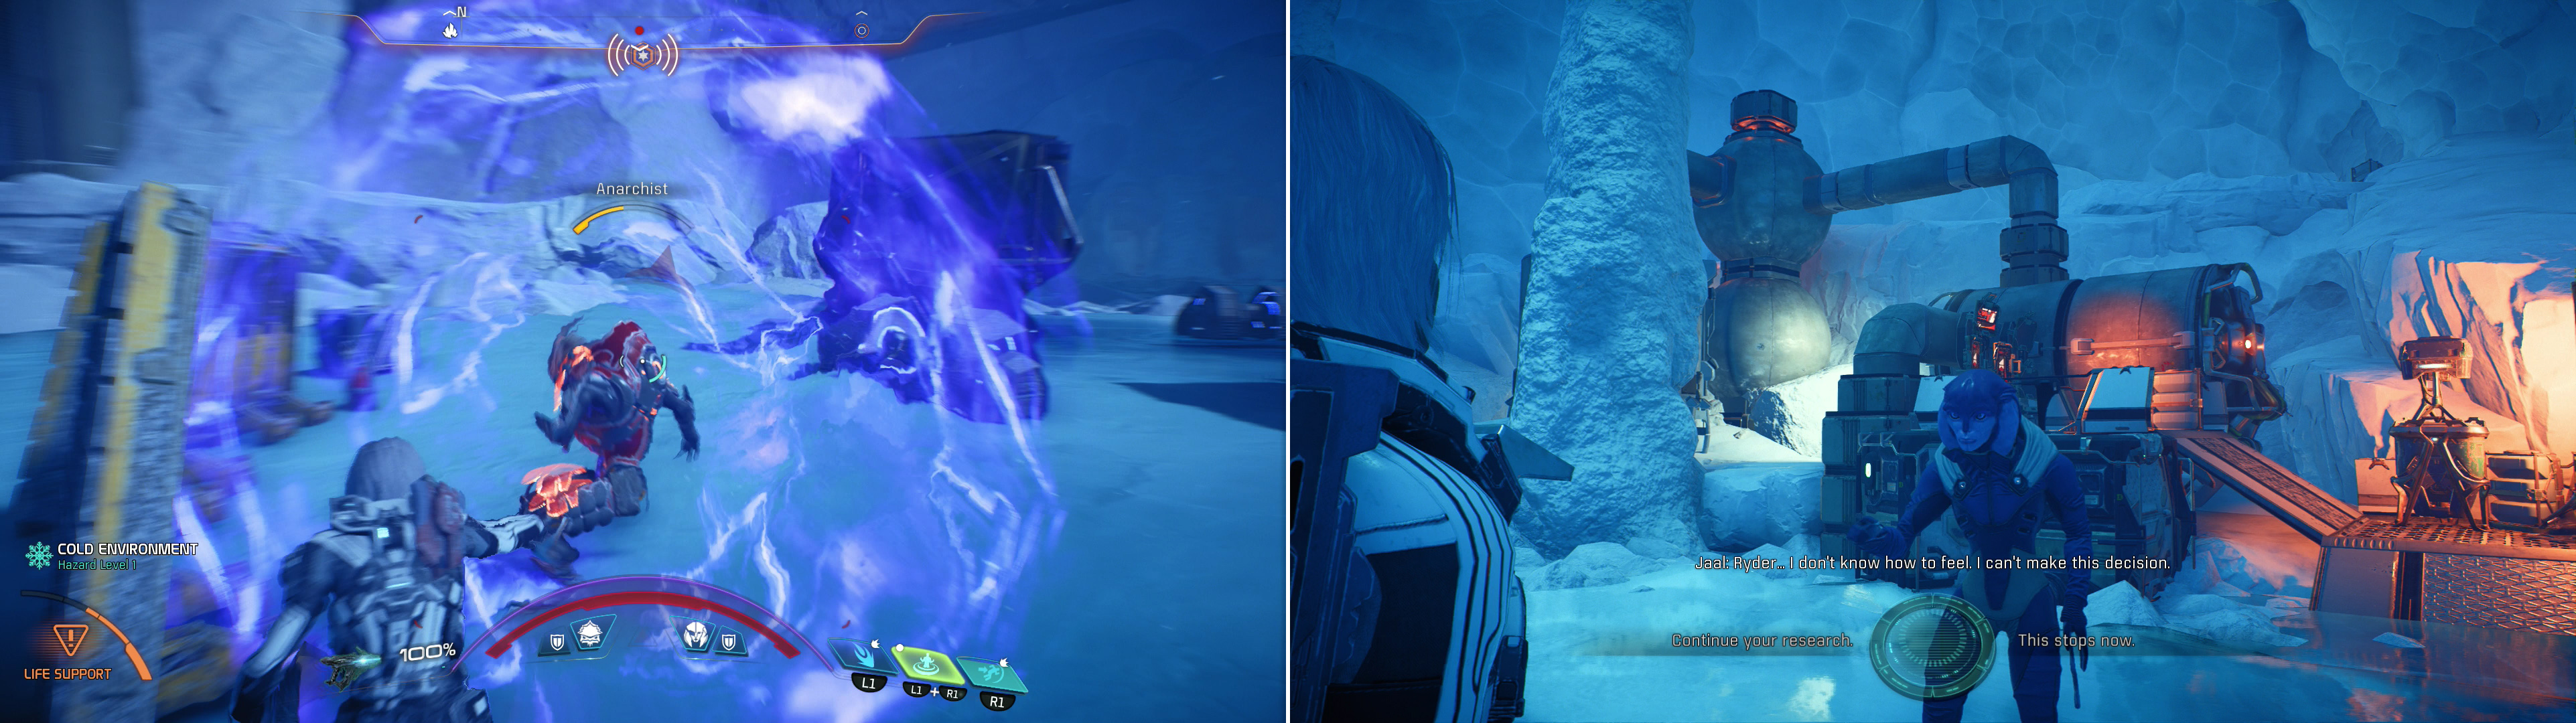 Fight through the Milky Way poachers (left) to confront the mastermind of the operation (left) who reveals the nature of her research and leaves you with a moral quandary (right).